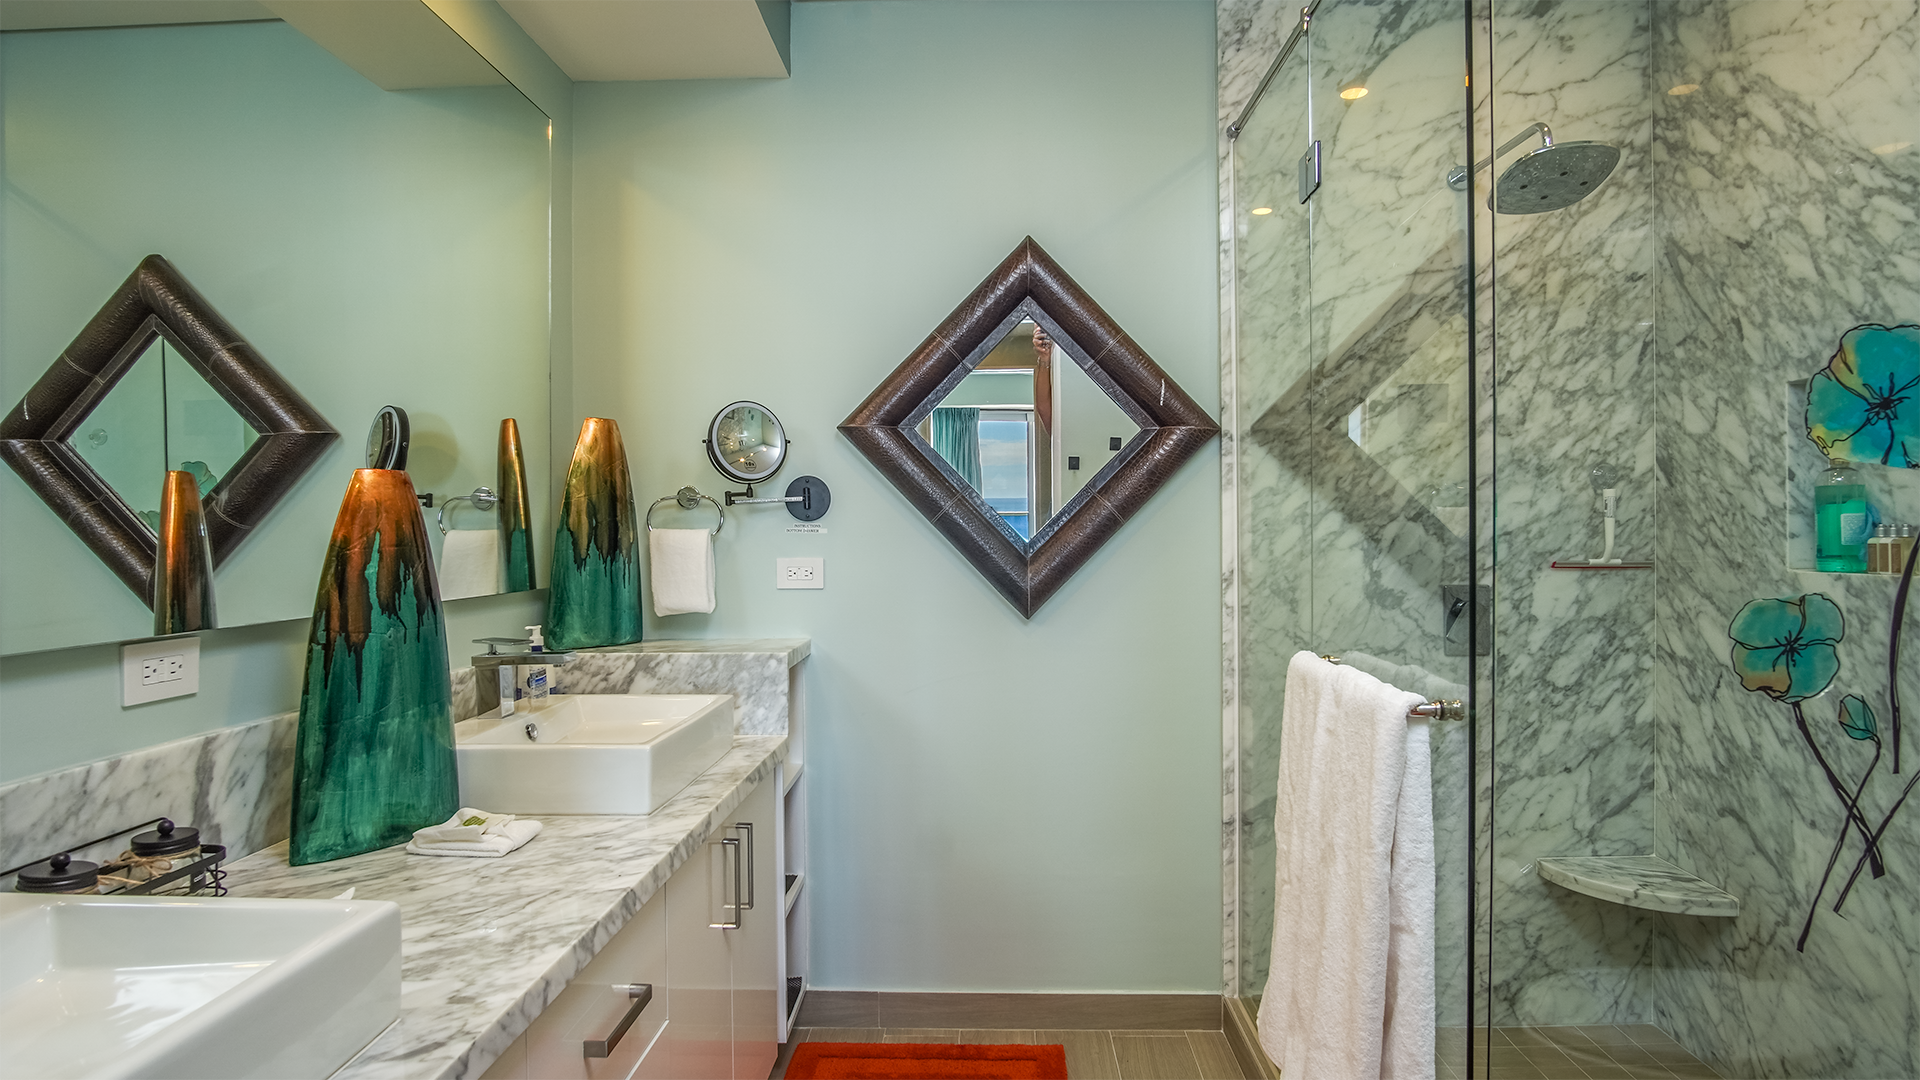 Enter the main bathroom. Exquisite marbled glass shower. and marbled double sink vanity with a full wall of illuminated mirror.